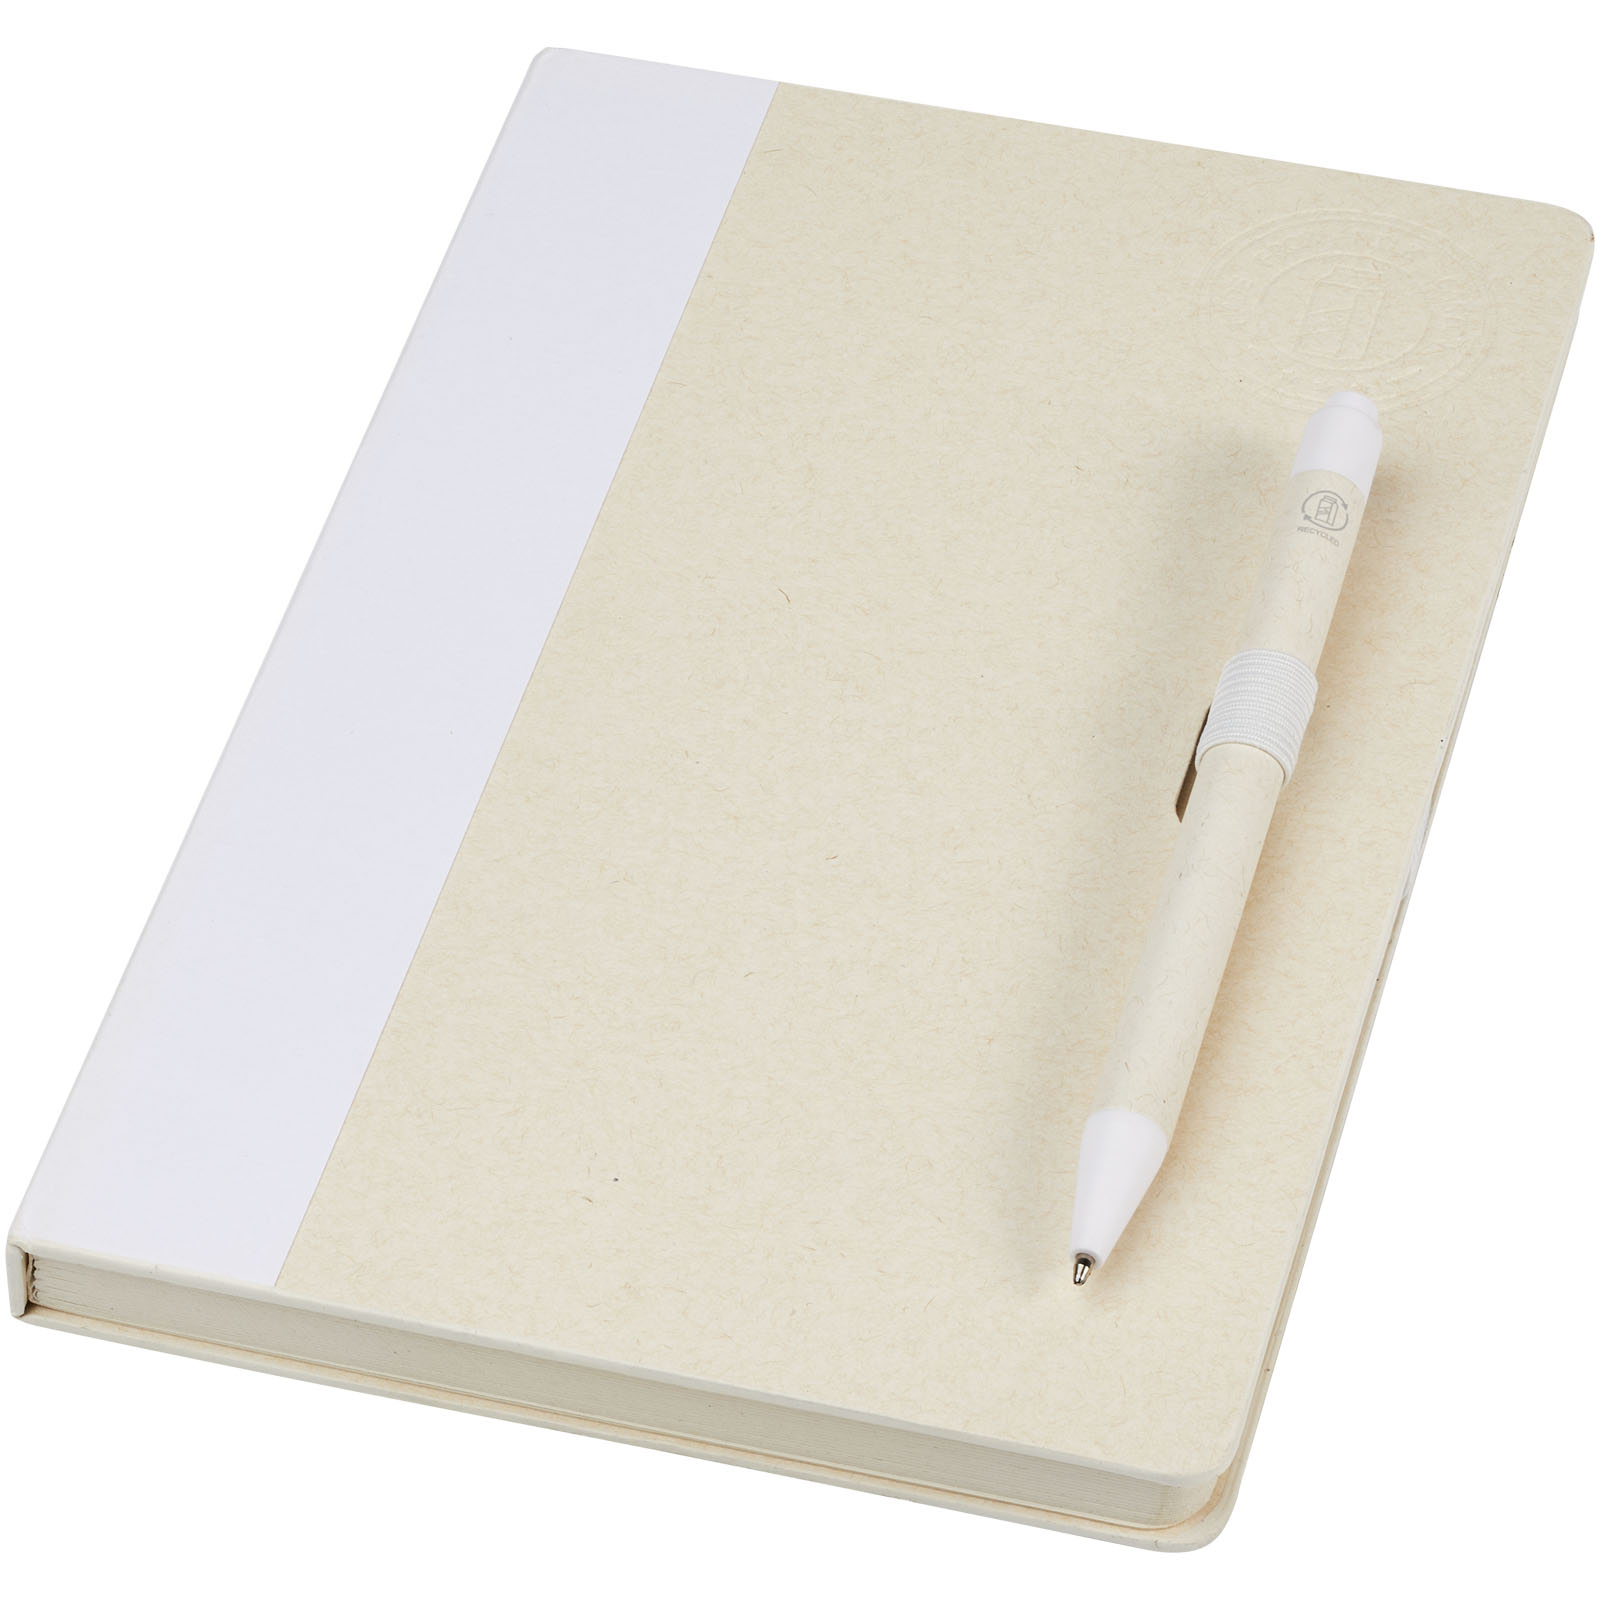 Notebooks & Desk Essentials - Dairy Dream A5 size reference recycled milk cartons notebook and ballpoint pen set